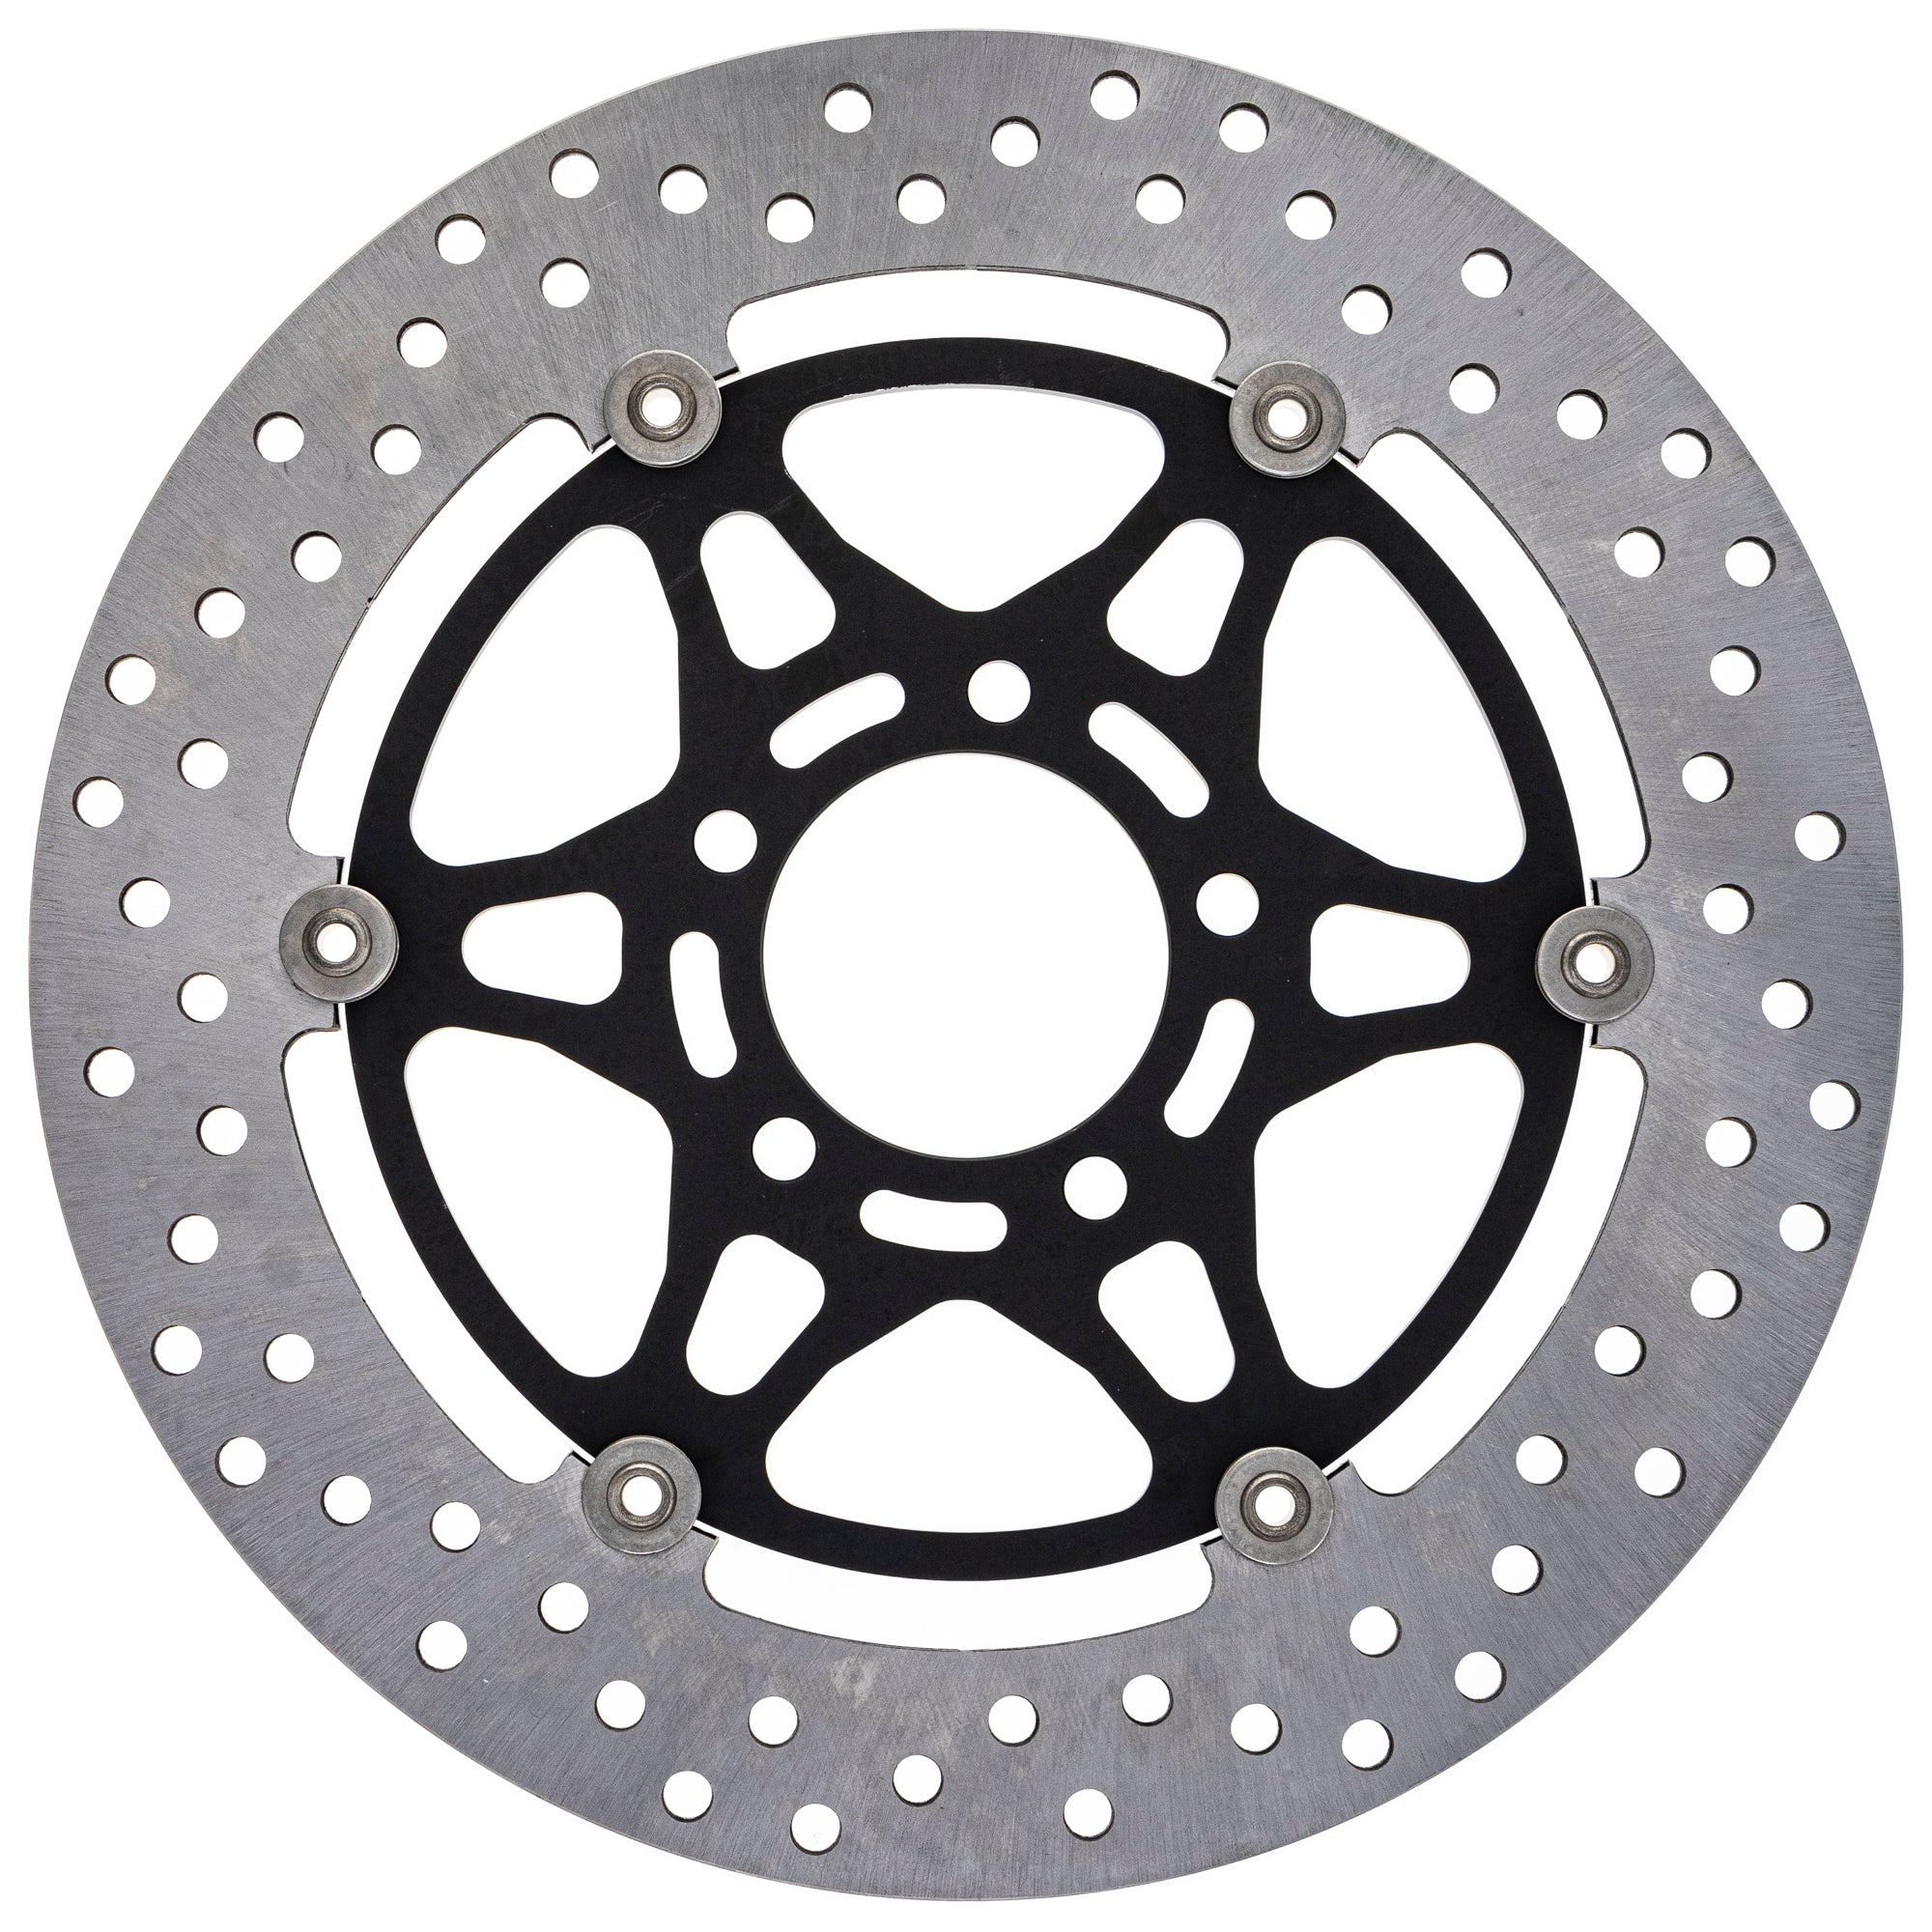 Front Brake Rotor for zOTHER TL1000S TL1000R Hayabusa GSXR750 NICHE 519-CRT2251R